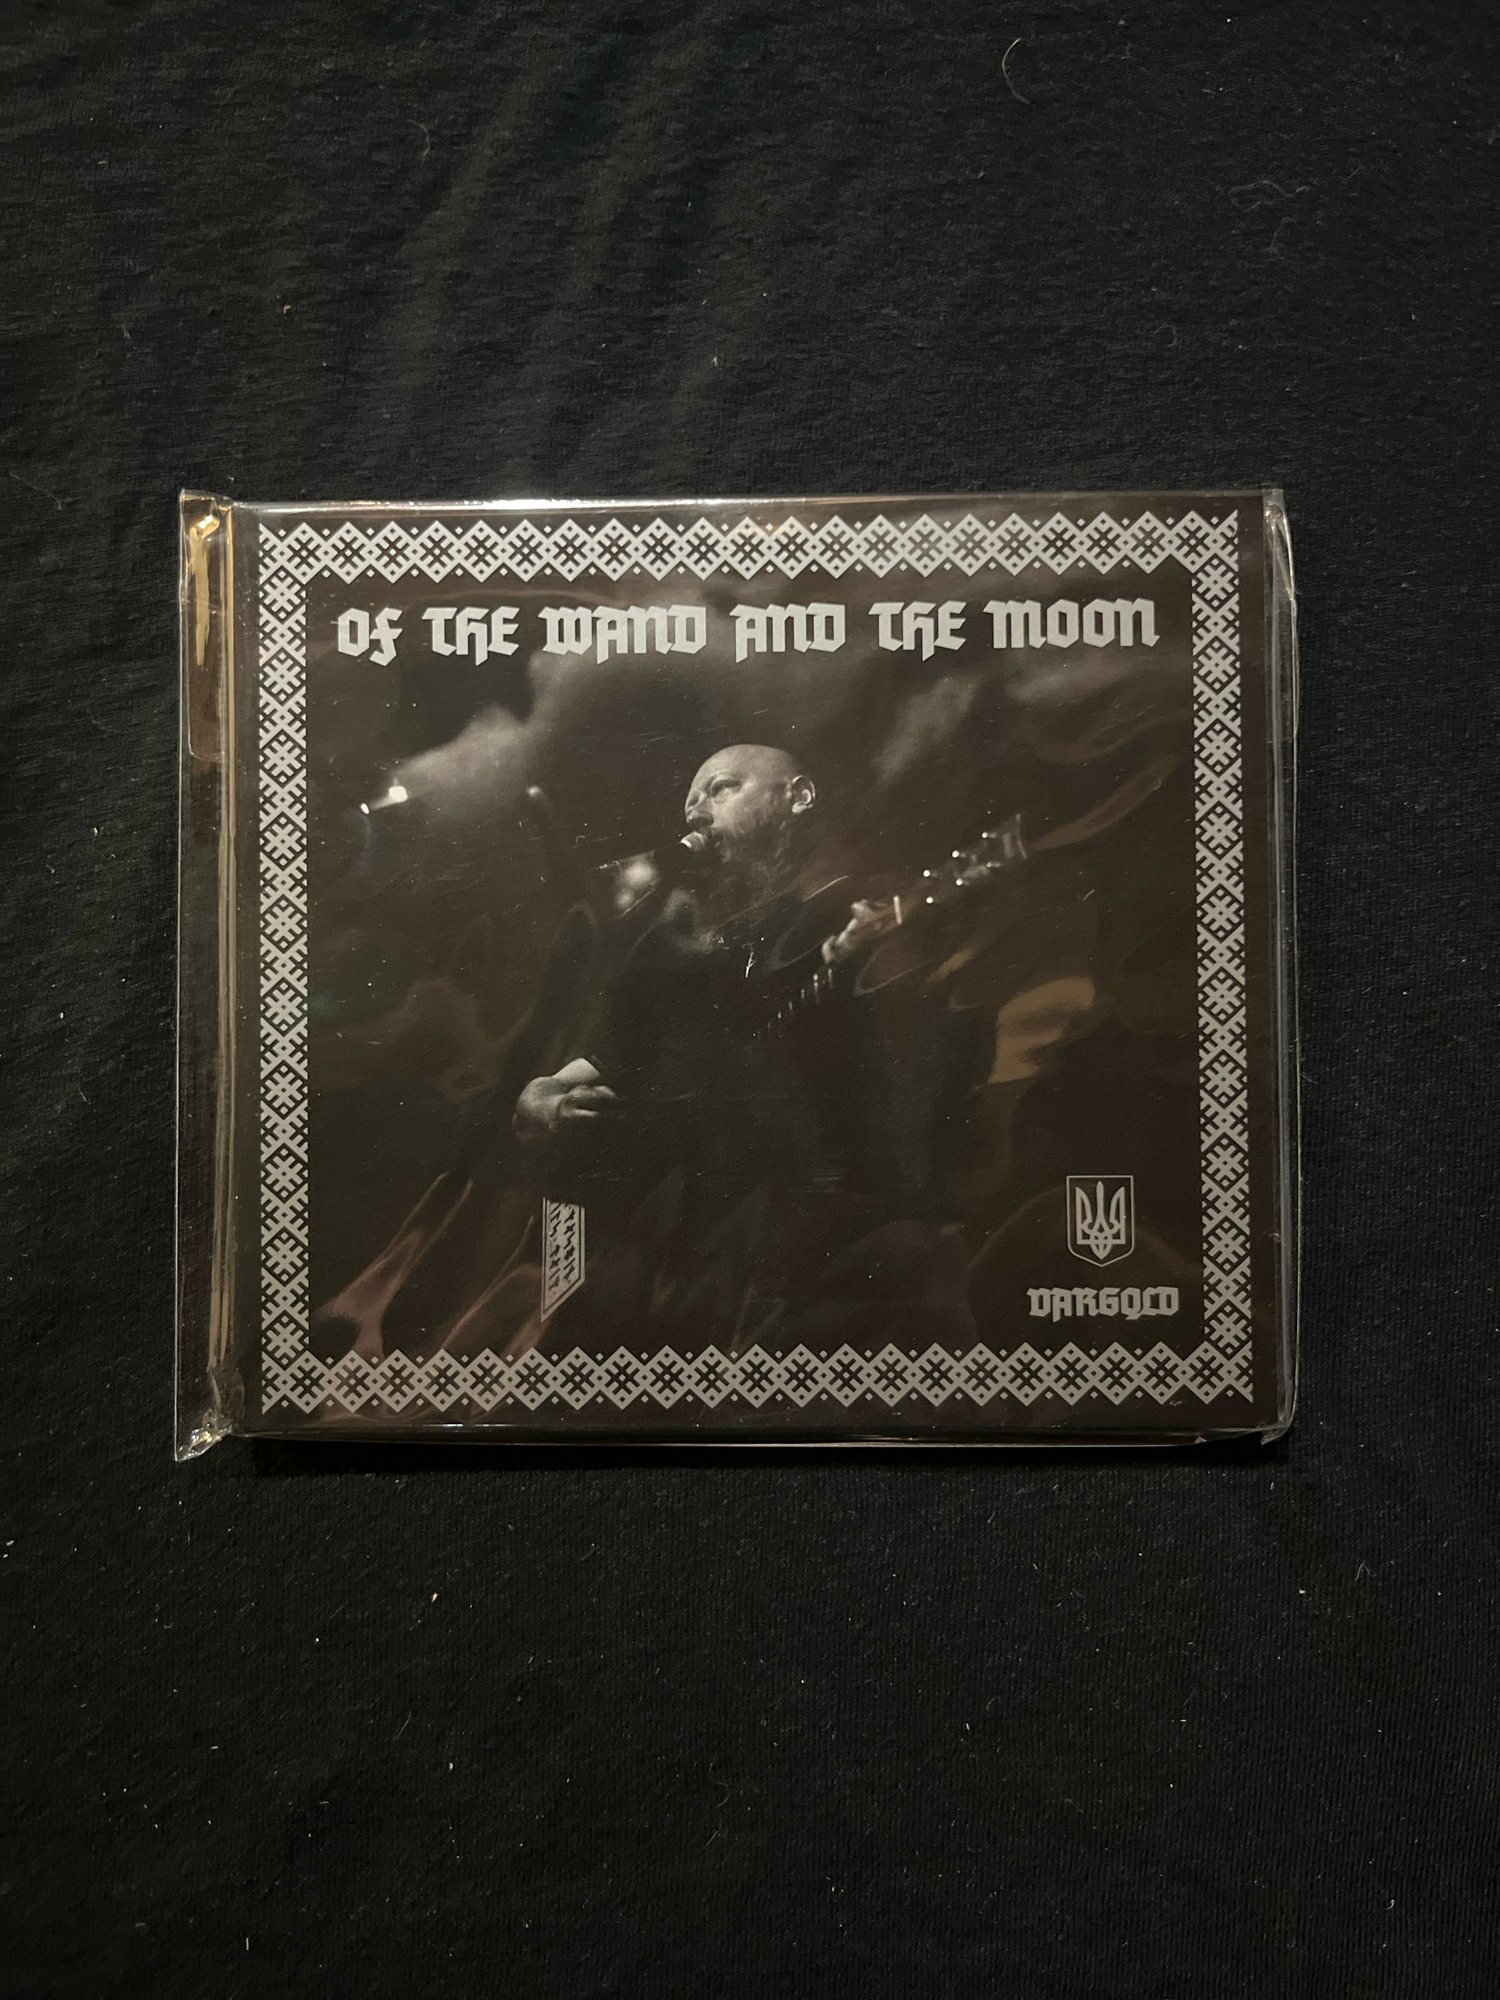 Of The Wand And the Moon - Vargqld CD (Old Captain)